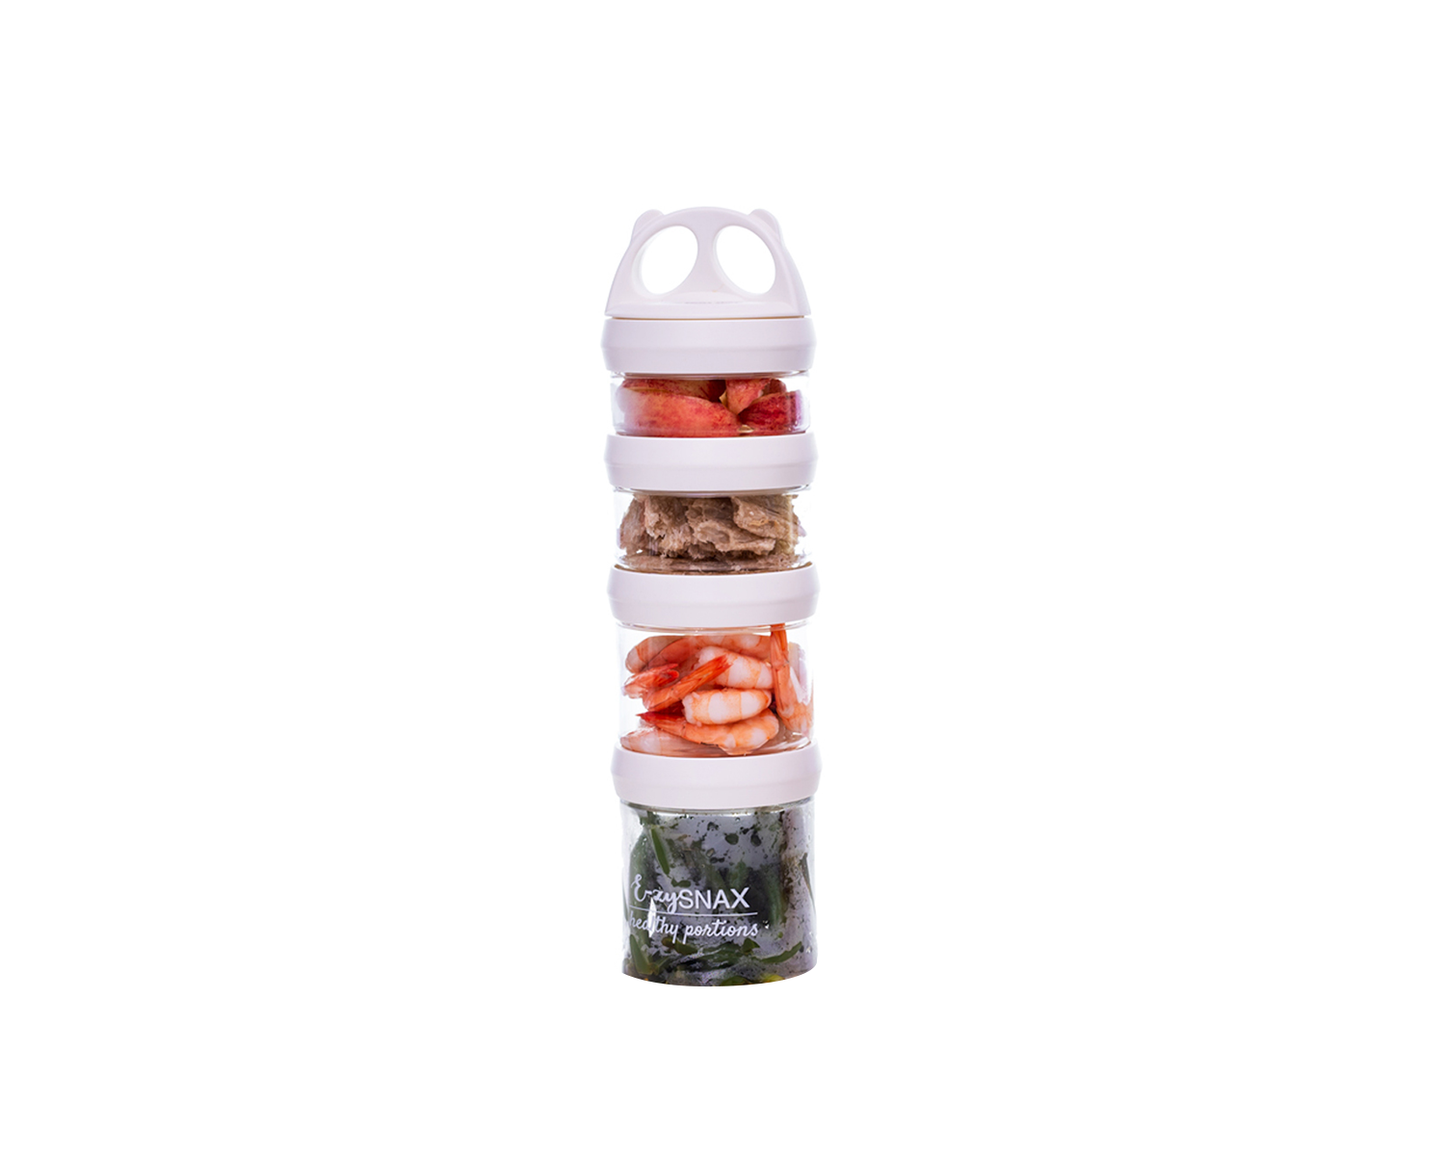 E-zy Snax - Stackable Lunch Box - 4 Cylindrical Containers